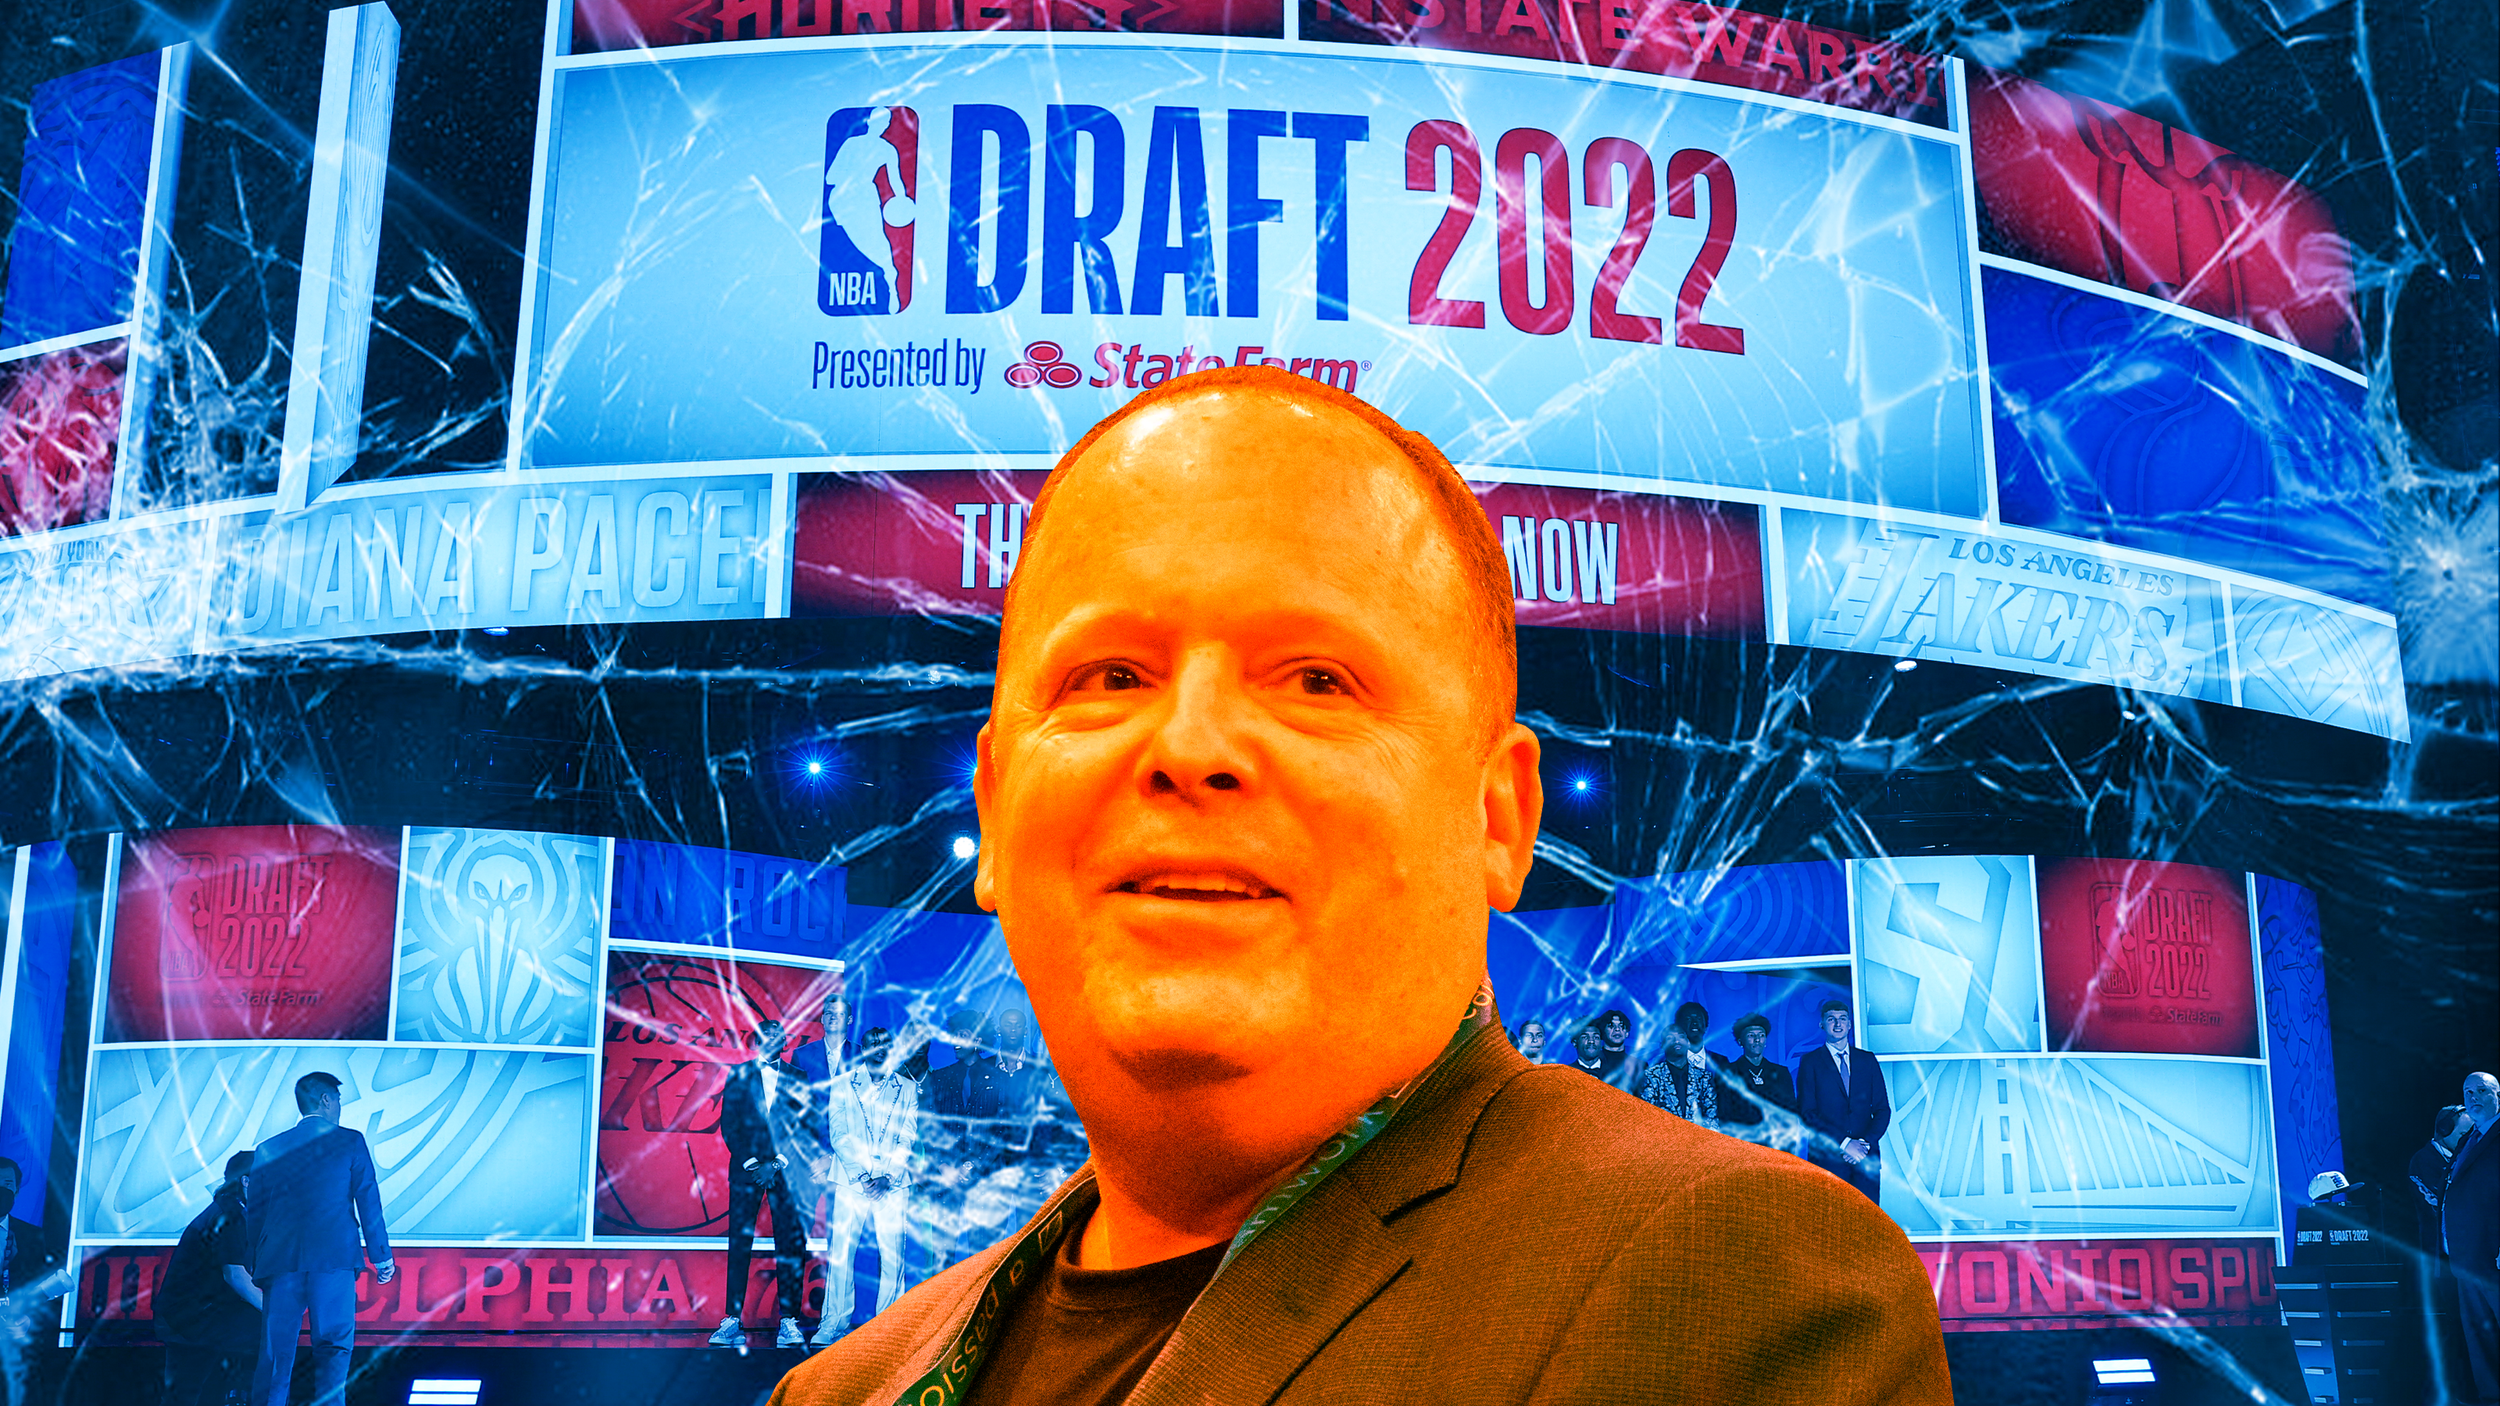 Decompression, Part 1: A look at what happened on draft night 2022